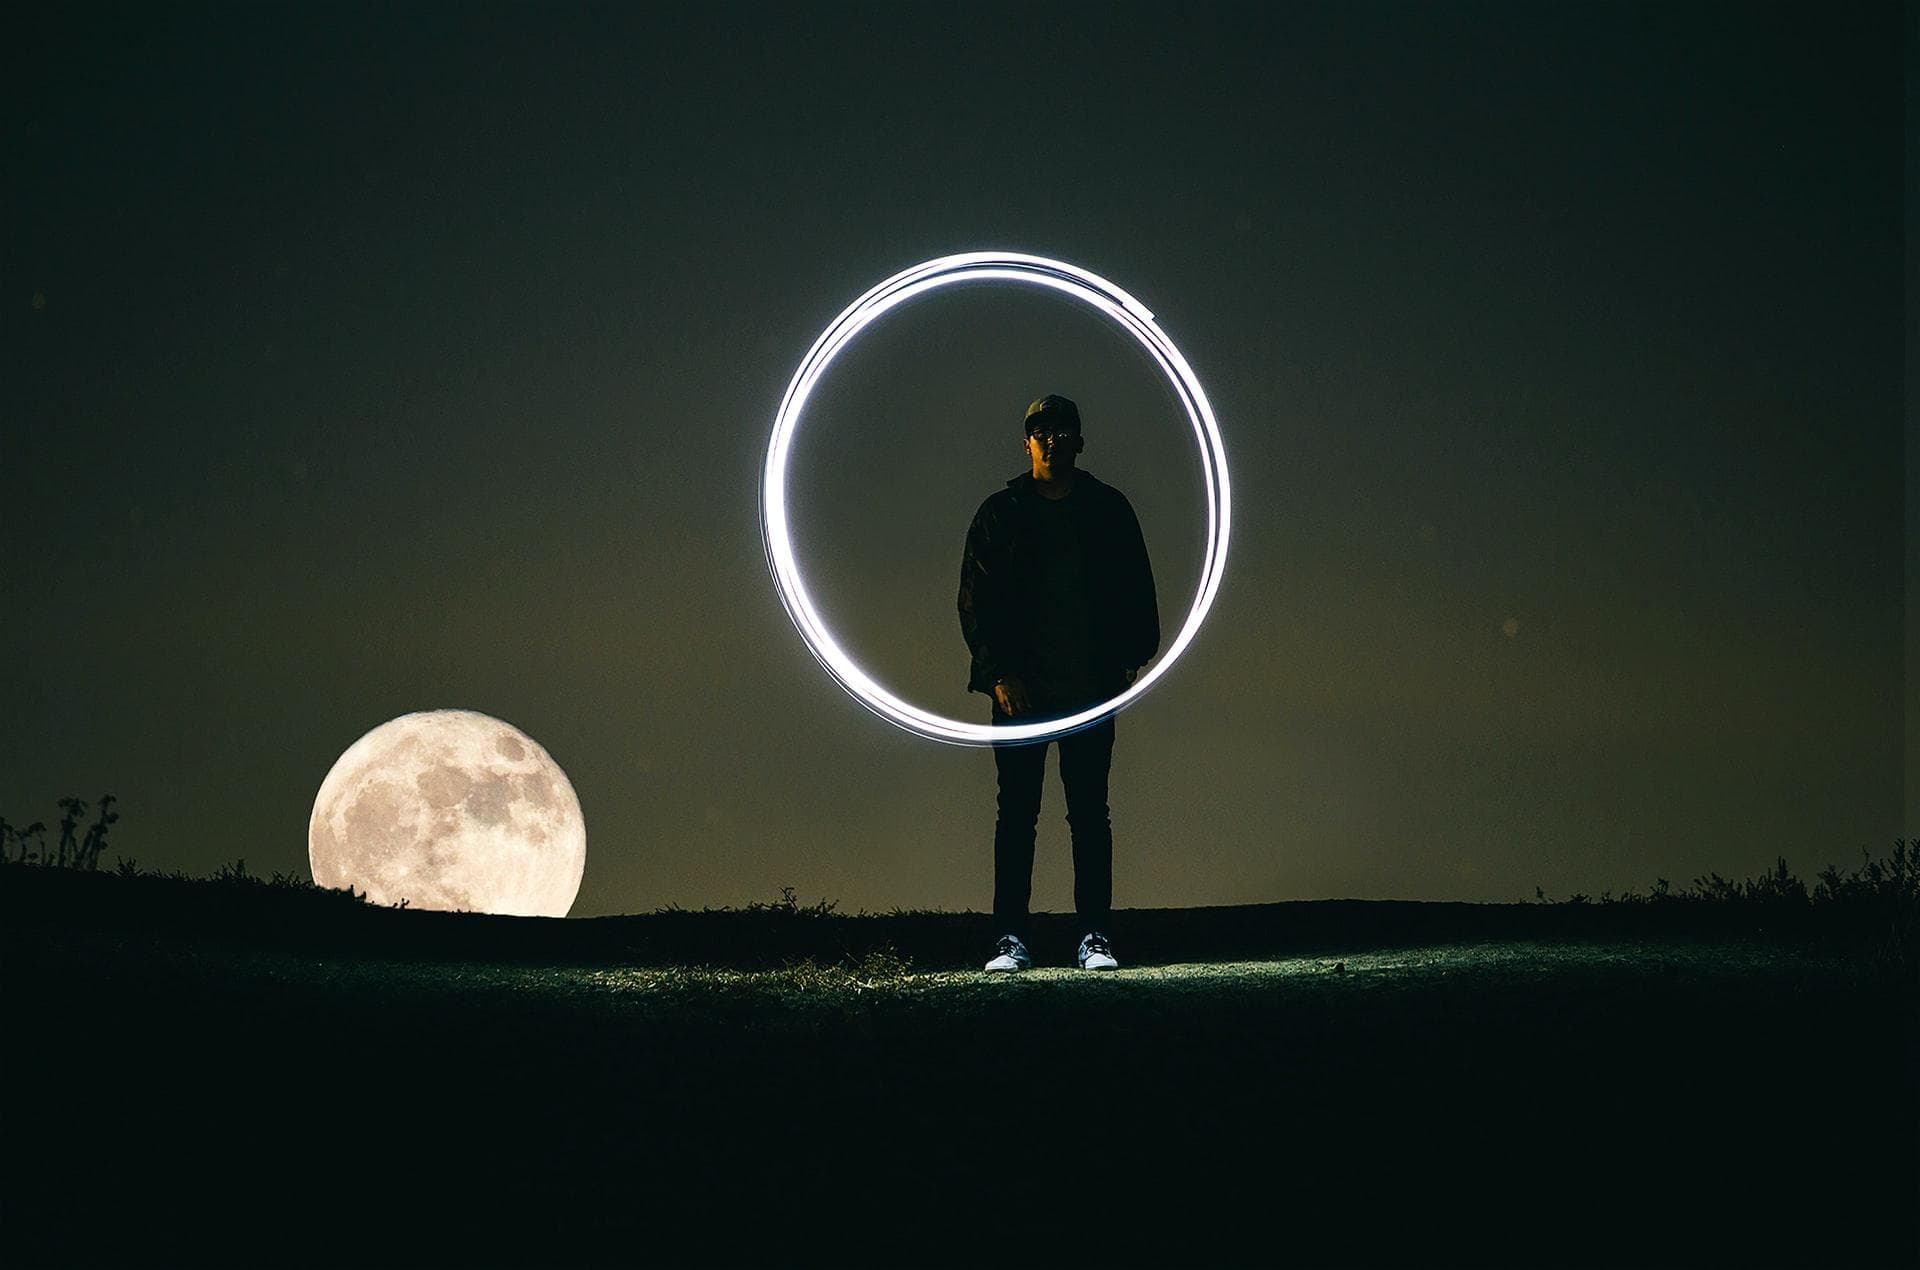 Man in the dark, painting a circle with light and long camera exposure